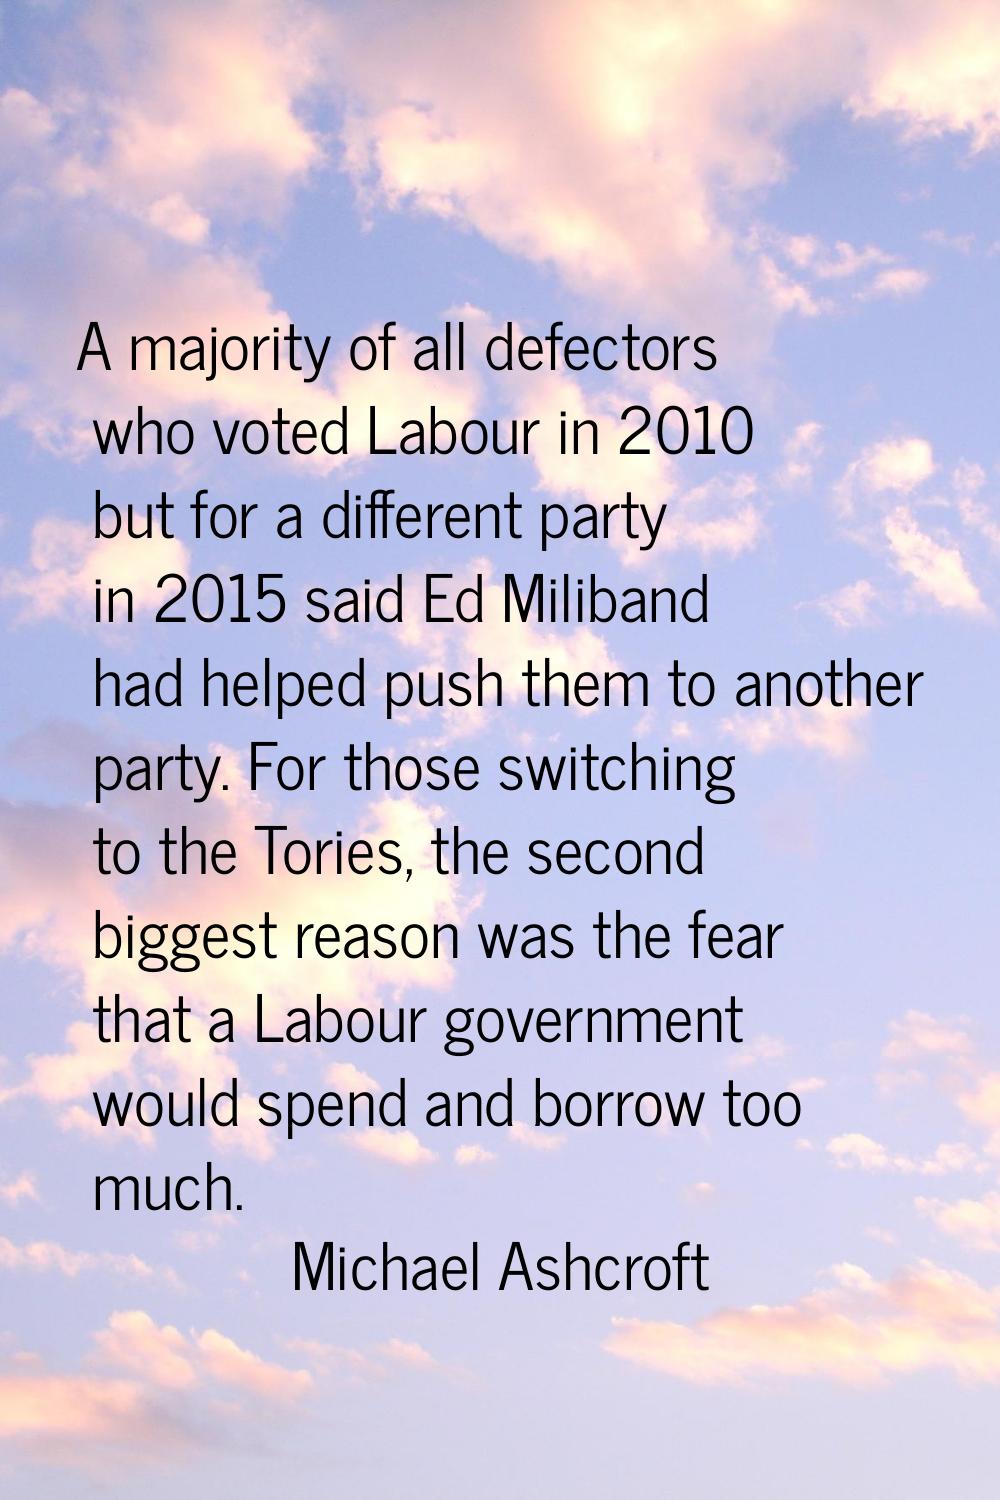 A majority of all defectors who voted Labour in 2010 but for a different party in 2015 said Ed Mili